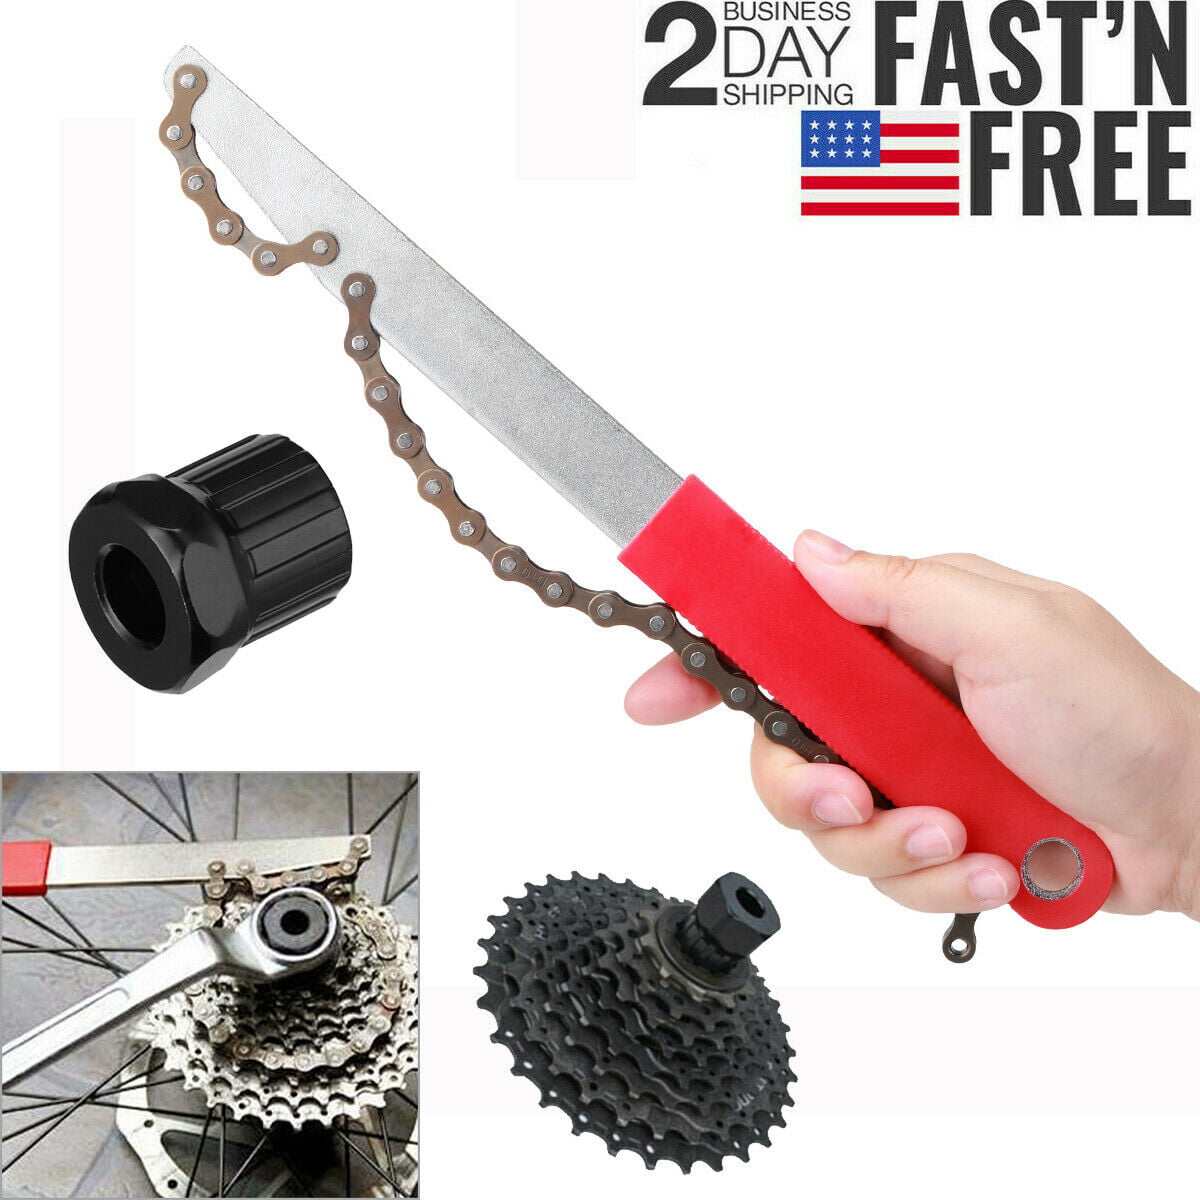 Details about   Portable Mountain Bike Bicycle Remover Repair Tool Cassette Freewheel Chain Whip 